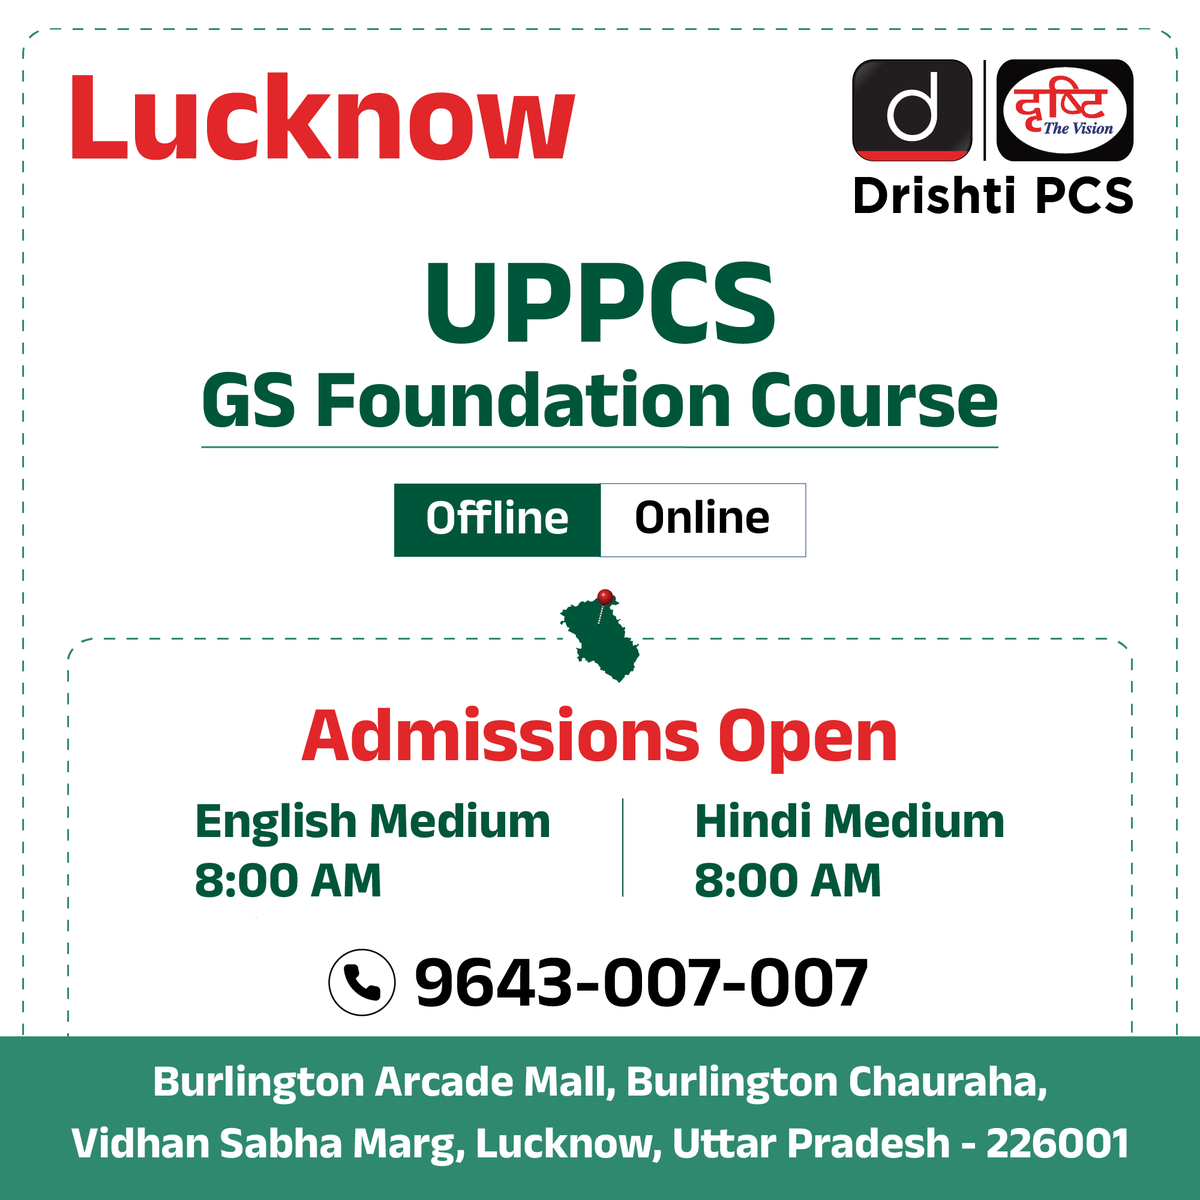 Unlock your potential with our UPPCS GS Foundation Course, featuring expert guidance! 

Check the link:drishti.xyz/UPPCS-GSF-LKO

#UPPCS #GSFoundation #Lucknow #StatePCS #UPPCSPrelims #UPPCSMains #Aspirants  #UPSCPreparation #UPSCCoaching #UPSC #DrishtiIAS